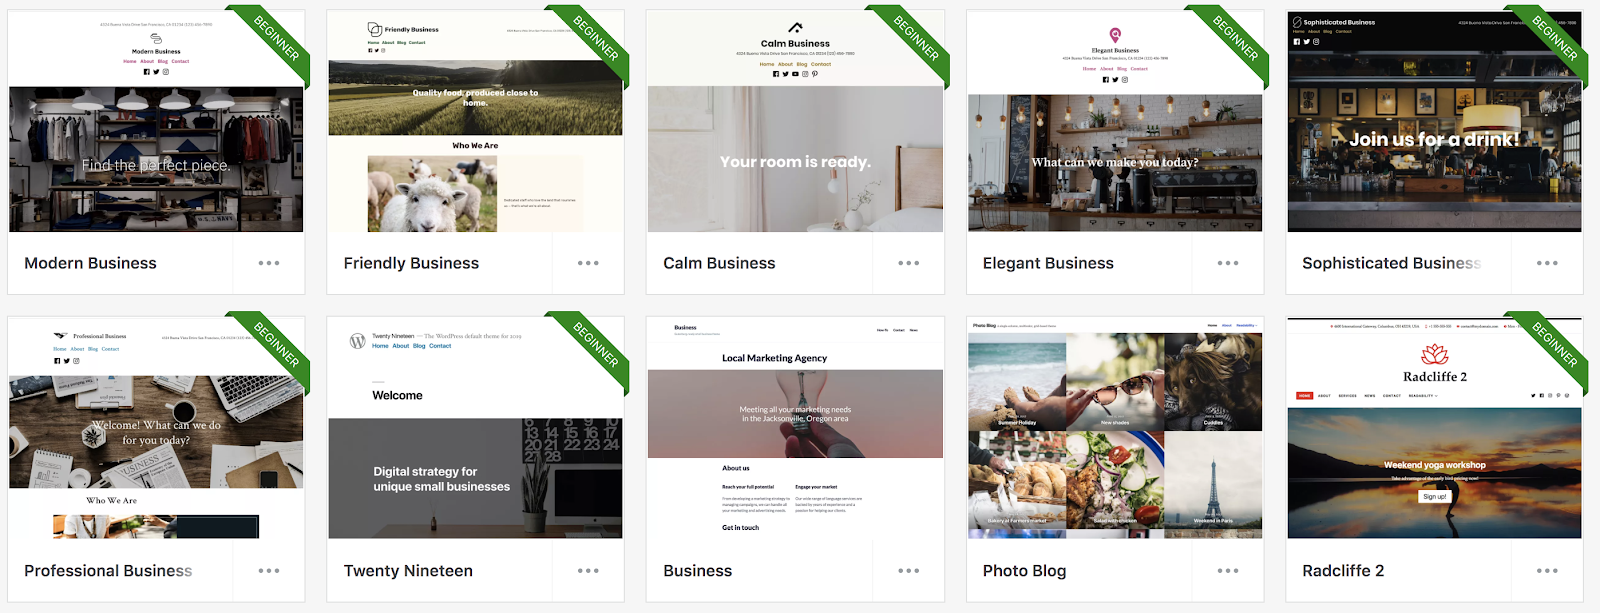 WordPress Theme Library and Examples